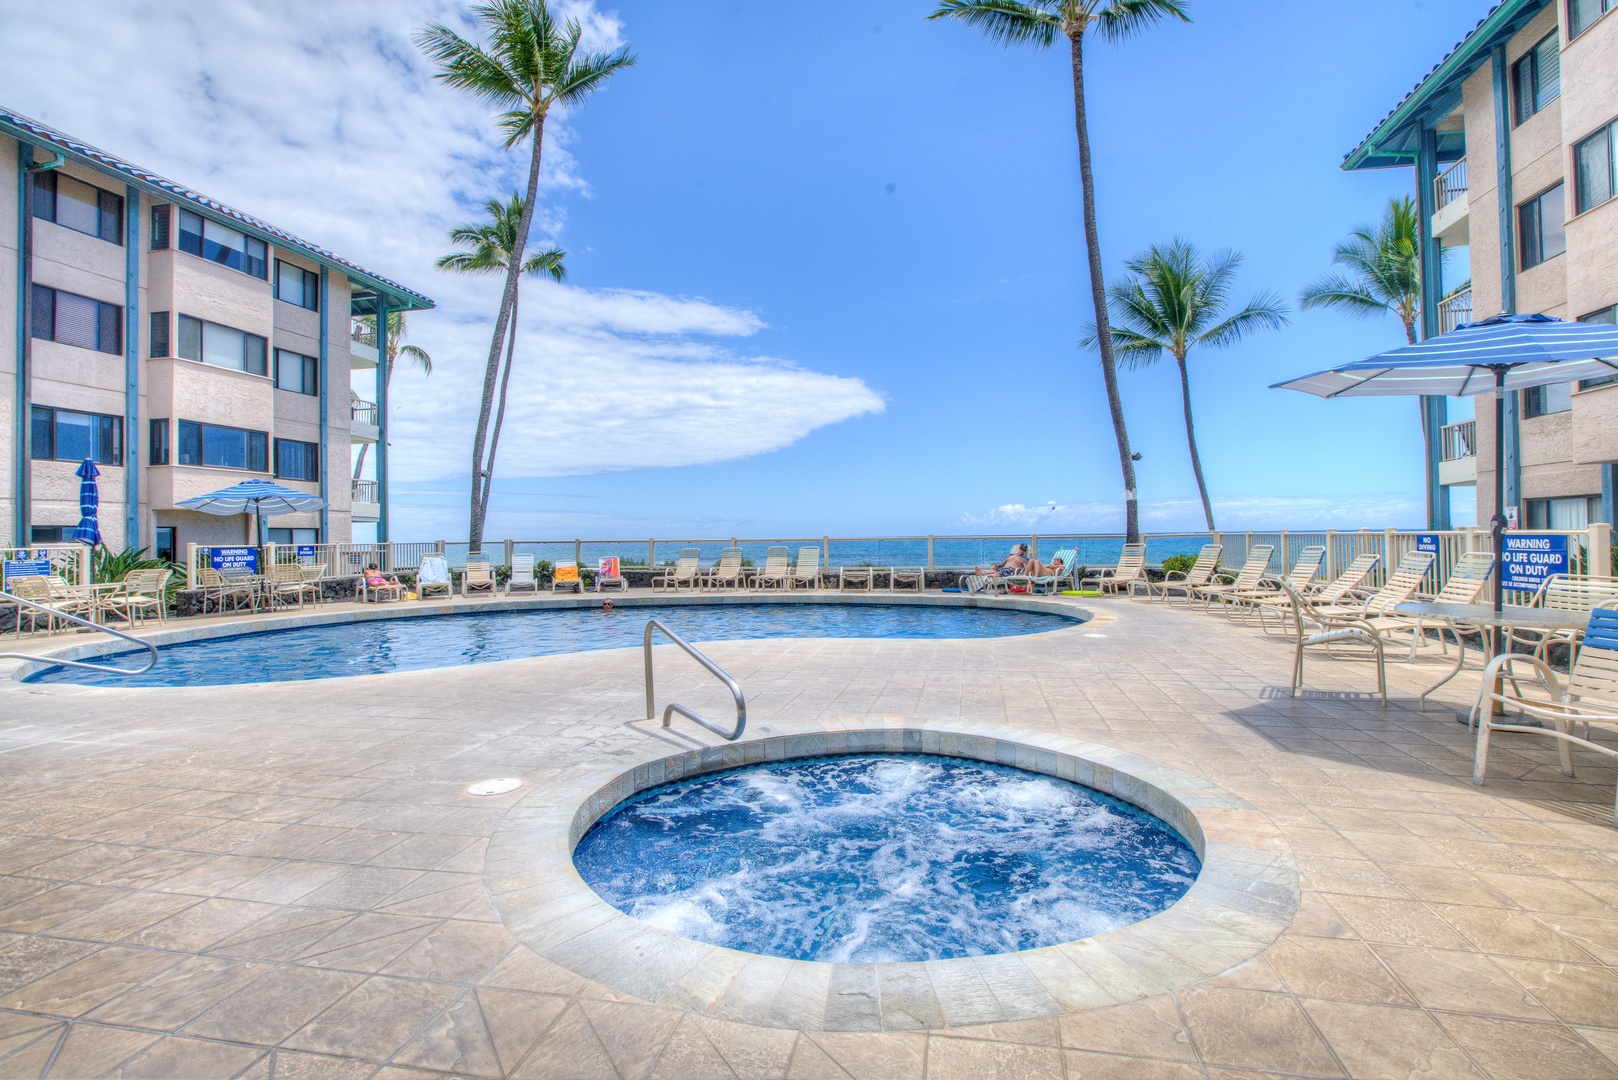 Kailua Kona Vacation Rentals, Kona Reef F11 - View of the Oceanfront Pool Area and Spa at the Kona Reef complex.